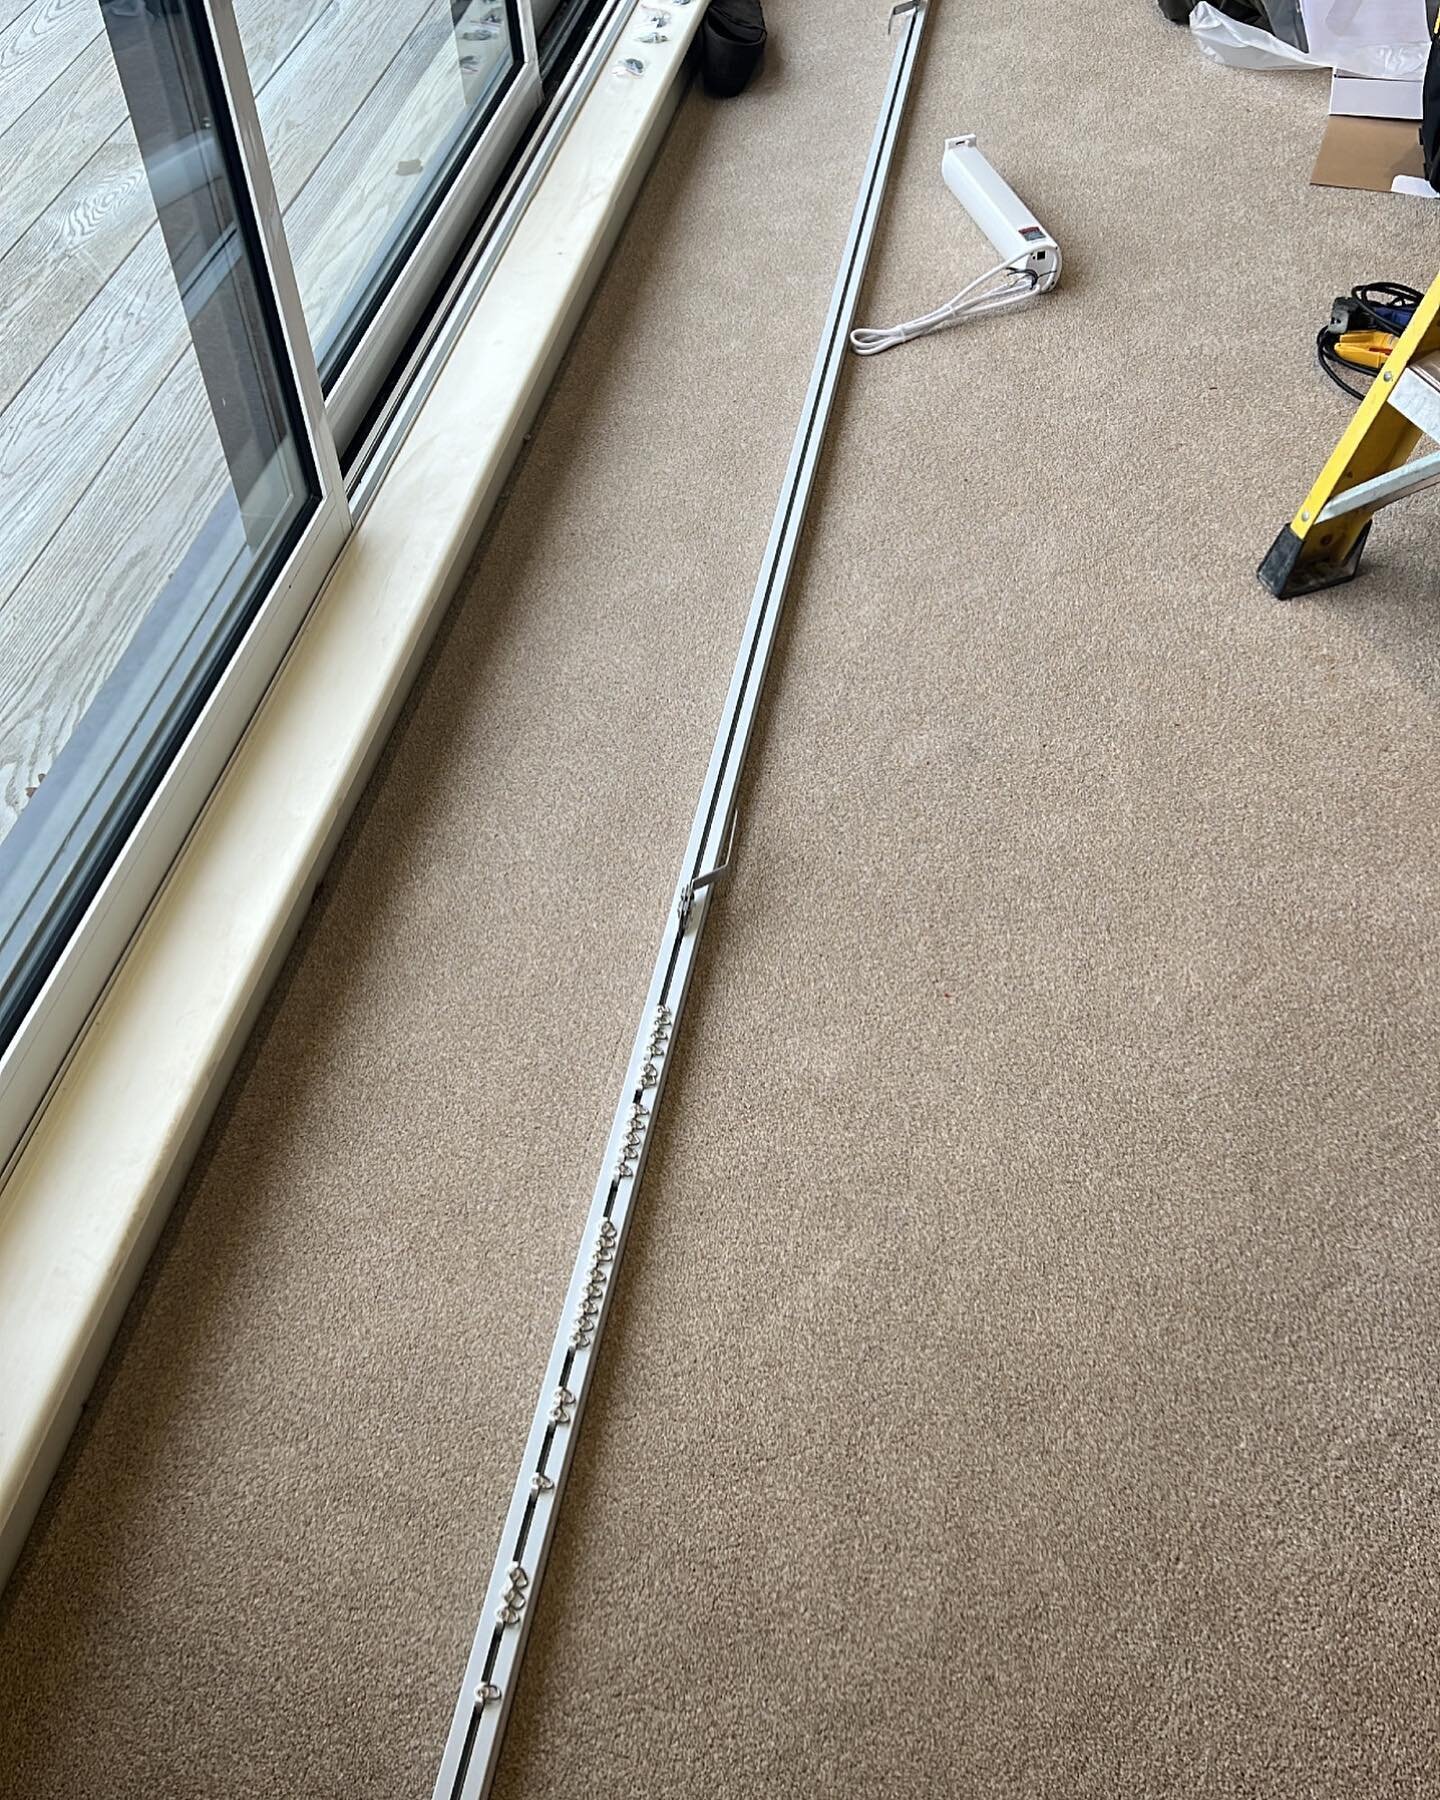 Recent window treatment job, we supplied automated curtain tracks ready for client supplied curtains.  Connected to the home automation system with full voice control! #smarthomes #smarthome #automated #curtain #knx #control4 #windowtreatments